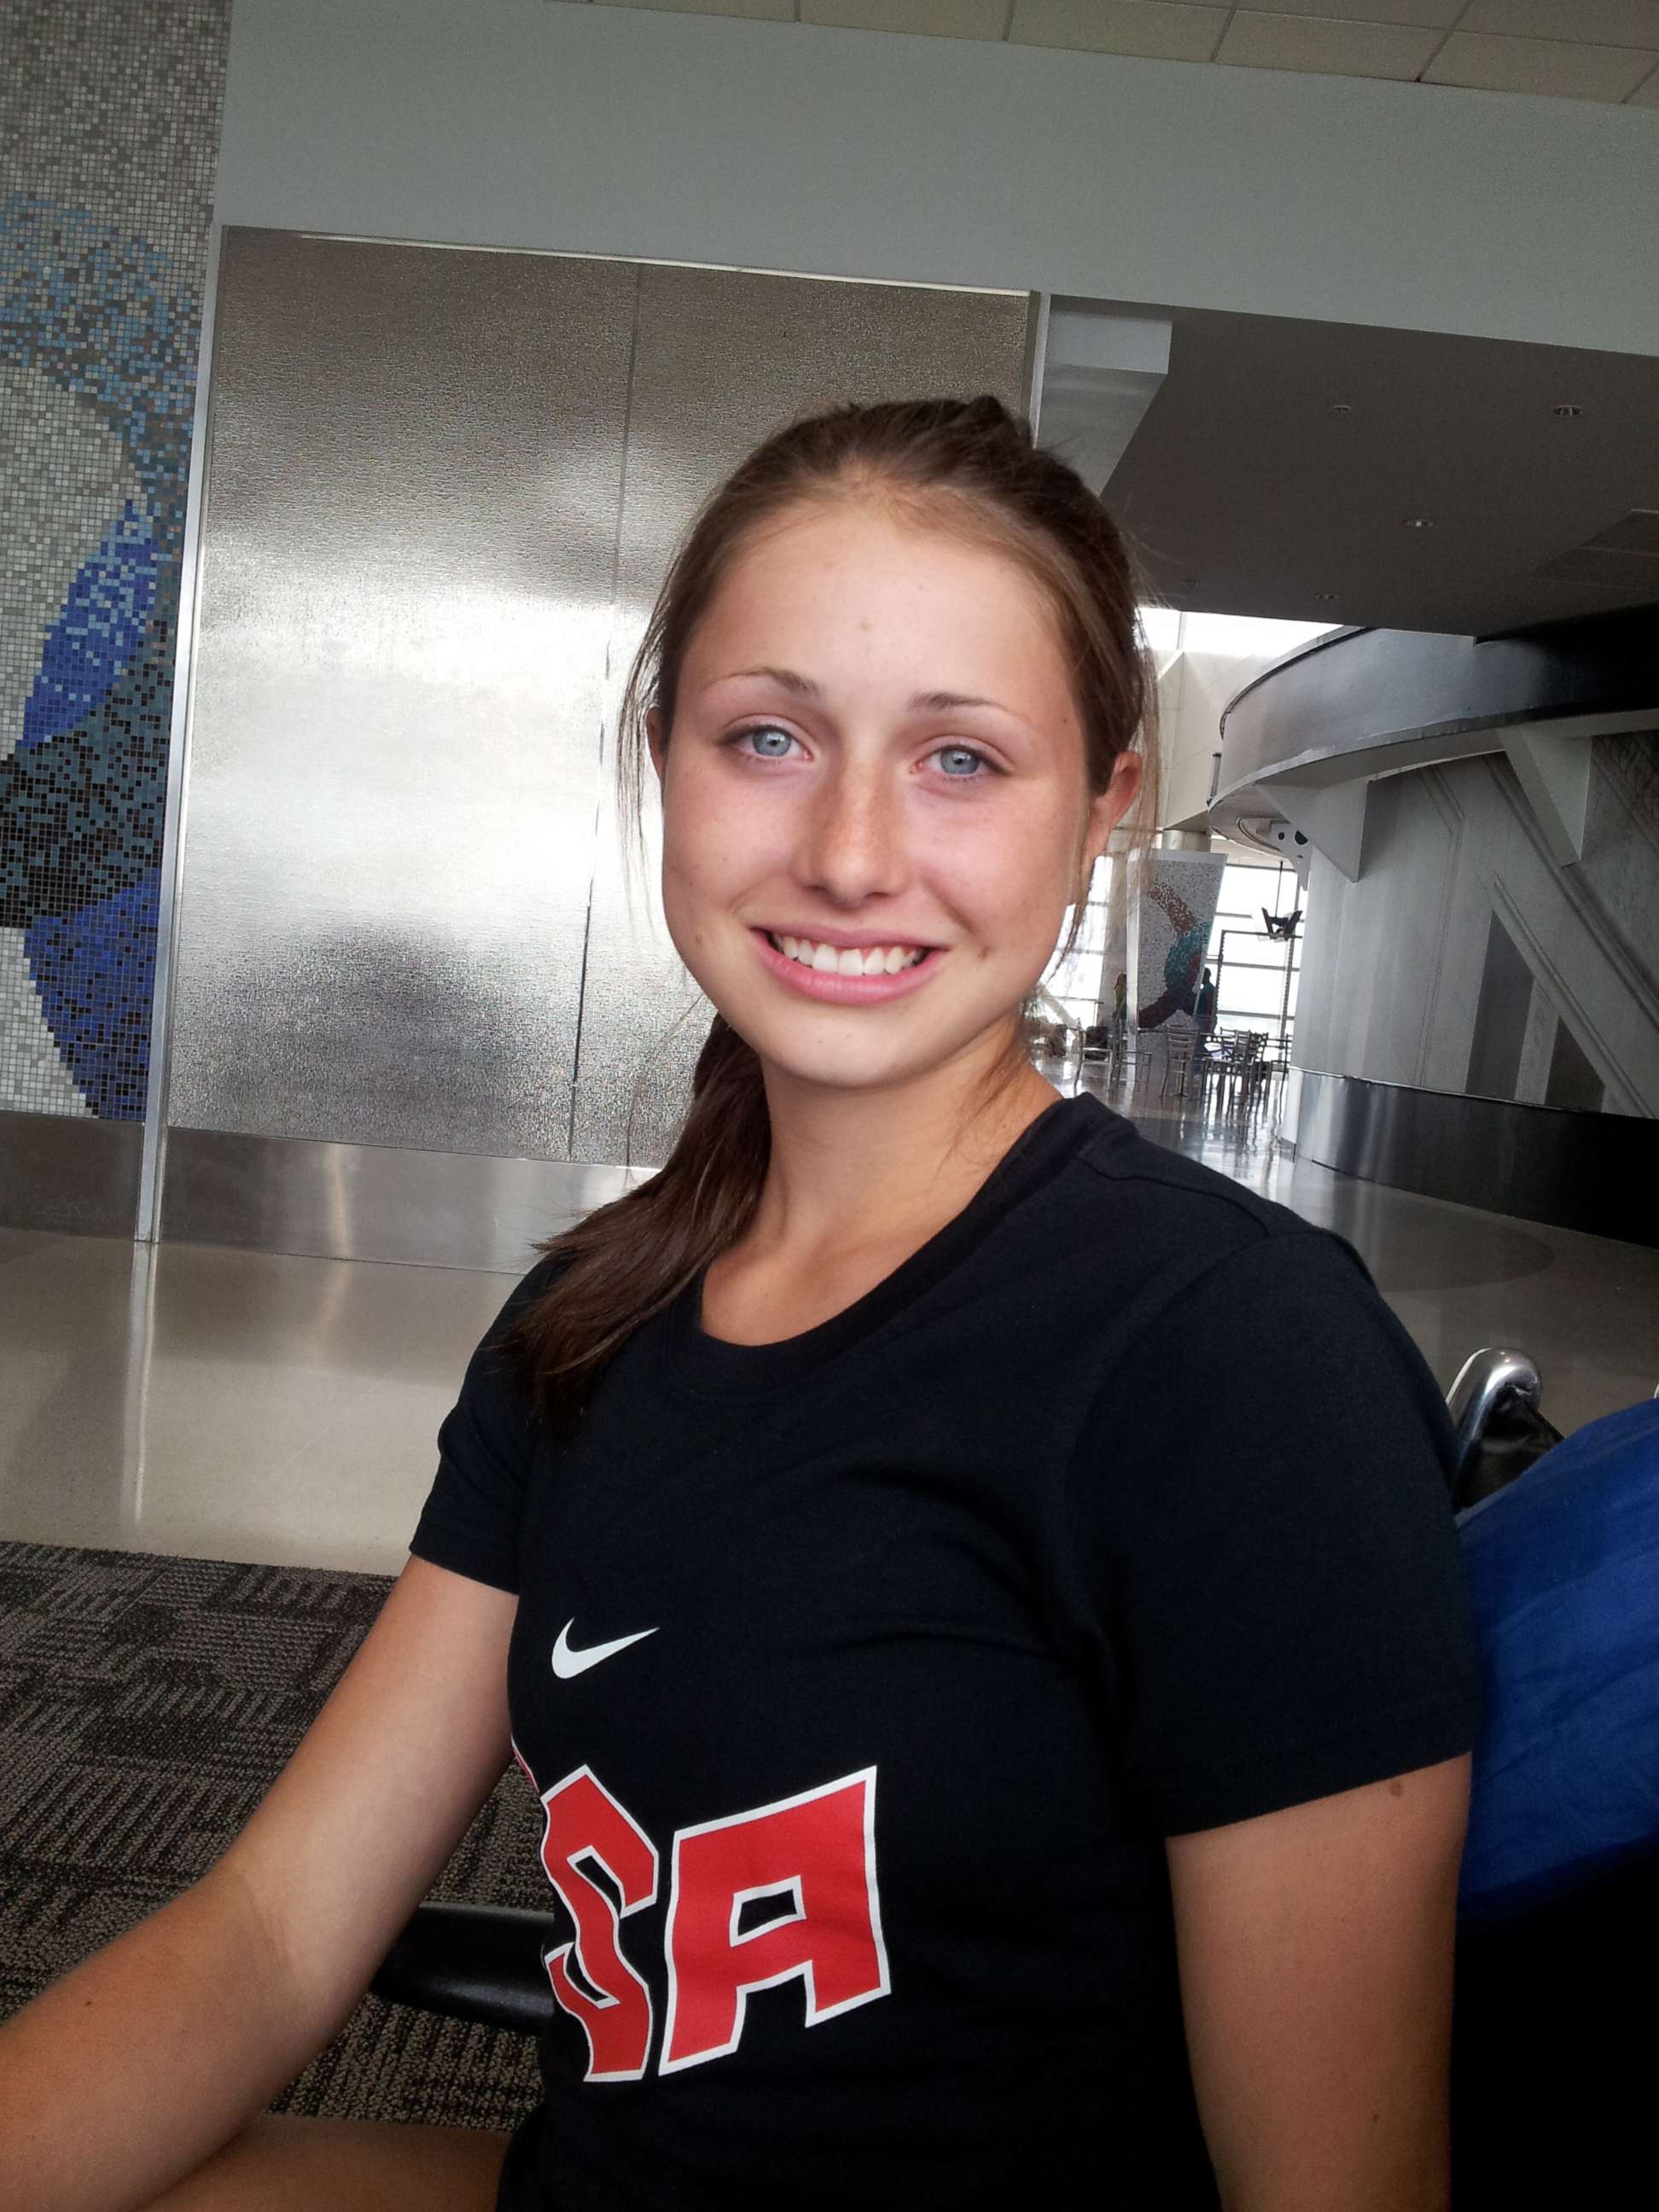 PHOTO: Lauren McCluskey, a Utah track star who was murdered by her ex-boyfriend, is pictured here.